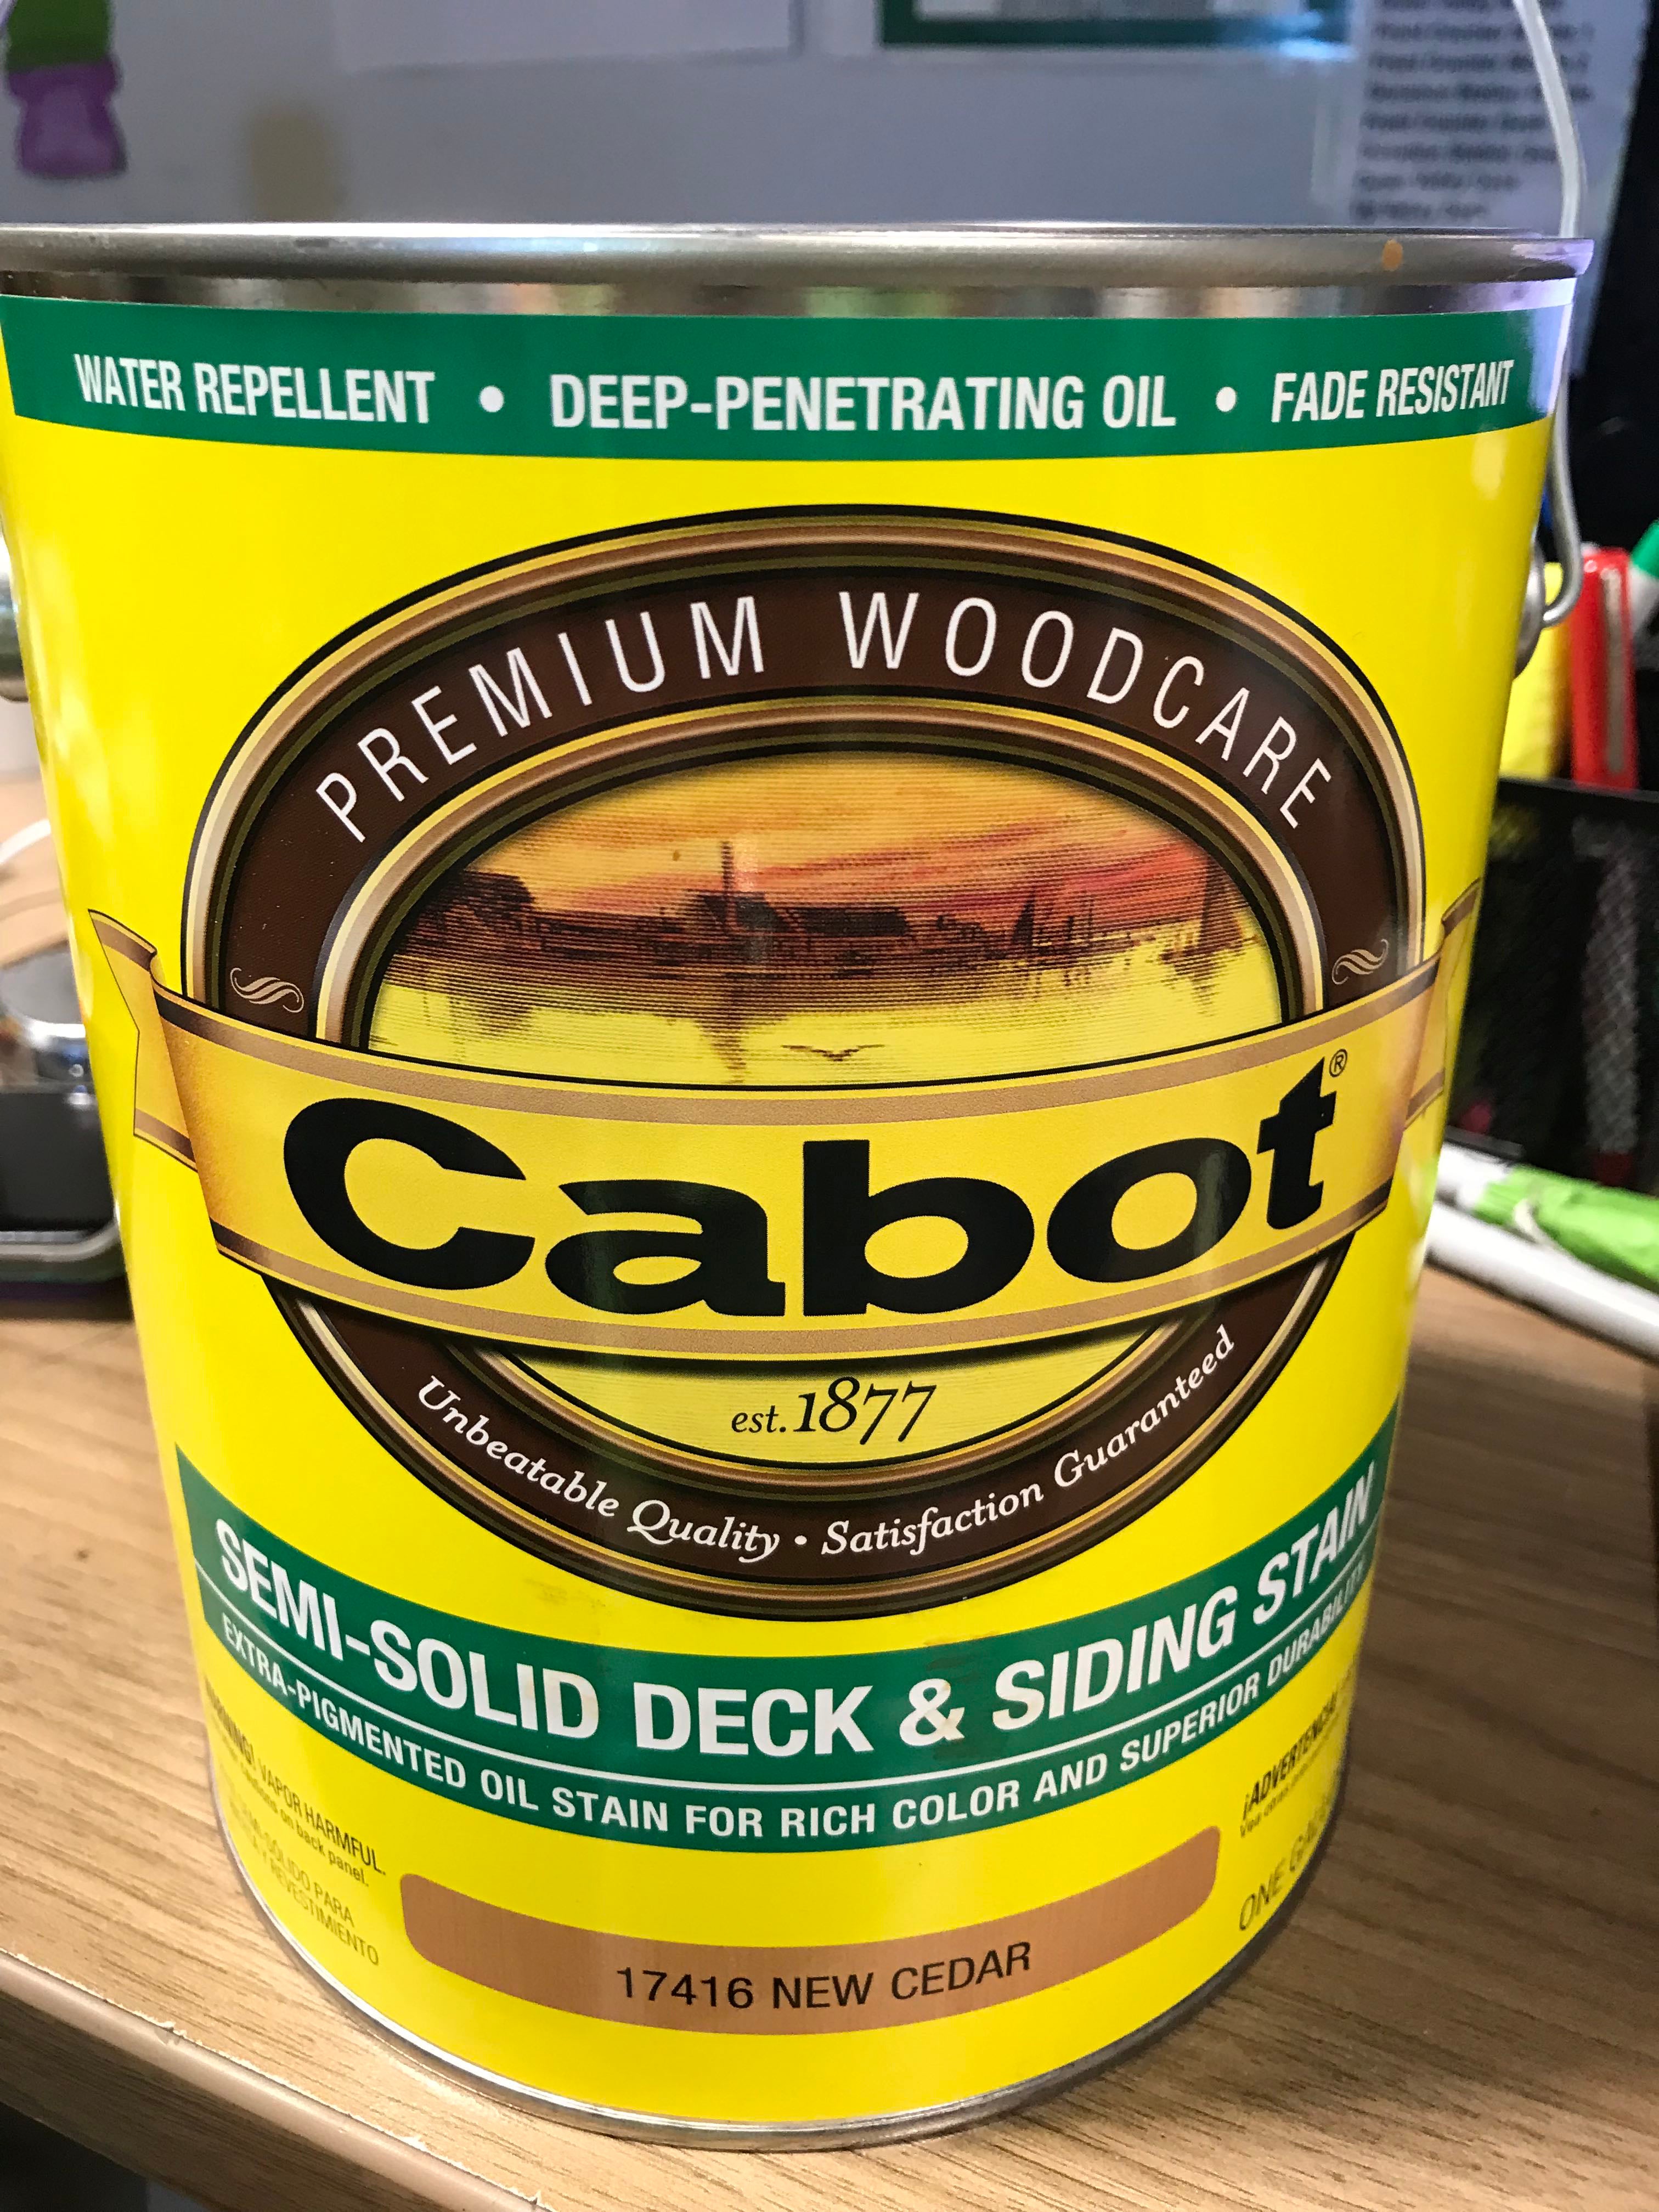 1 Gallon Cabot Semi-Solid Deck & Siding 17416 New Cedar Extra Pigmented Oil Stain